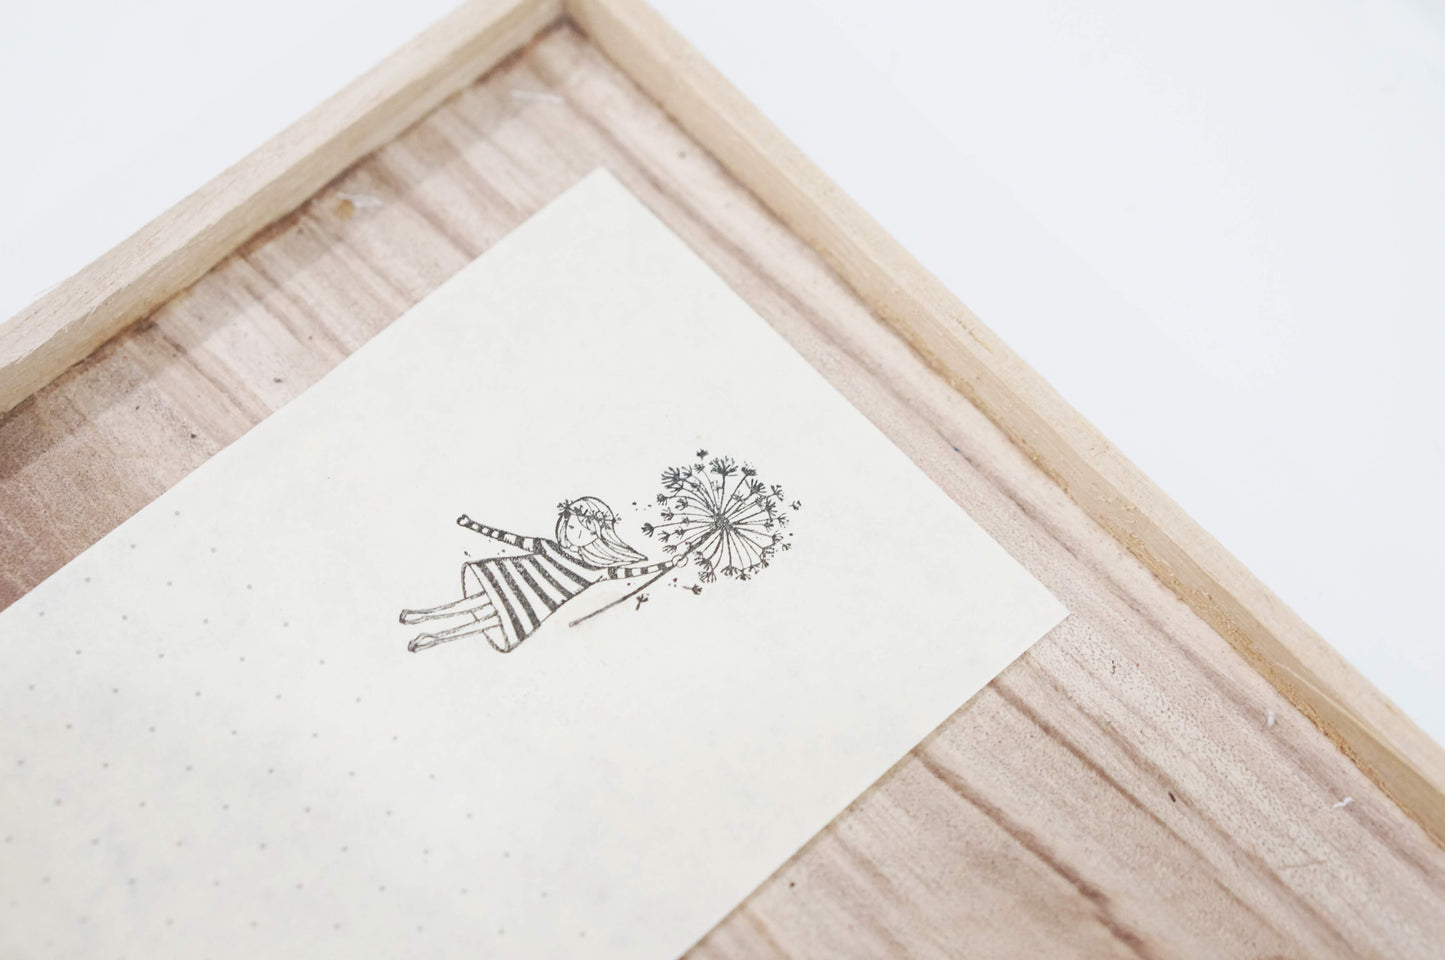 Black Milk Project "Flying" Series Rubber Stamp